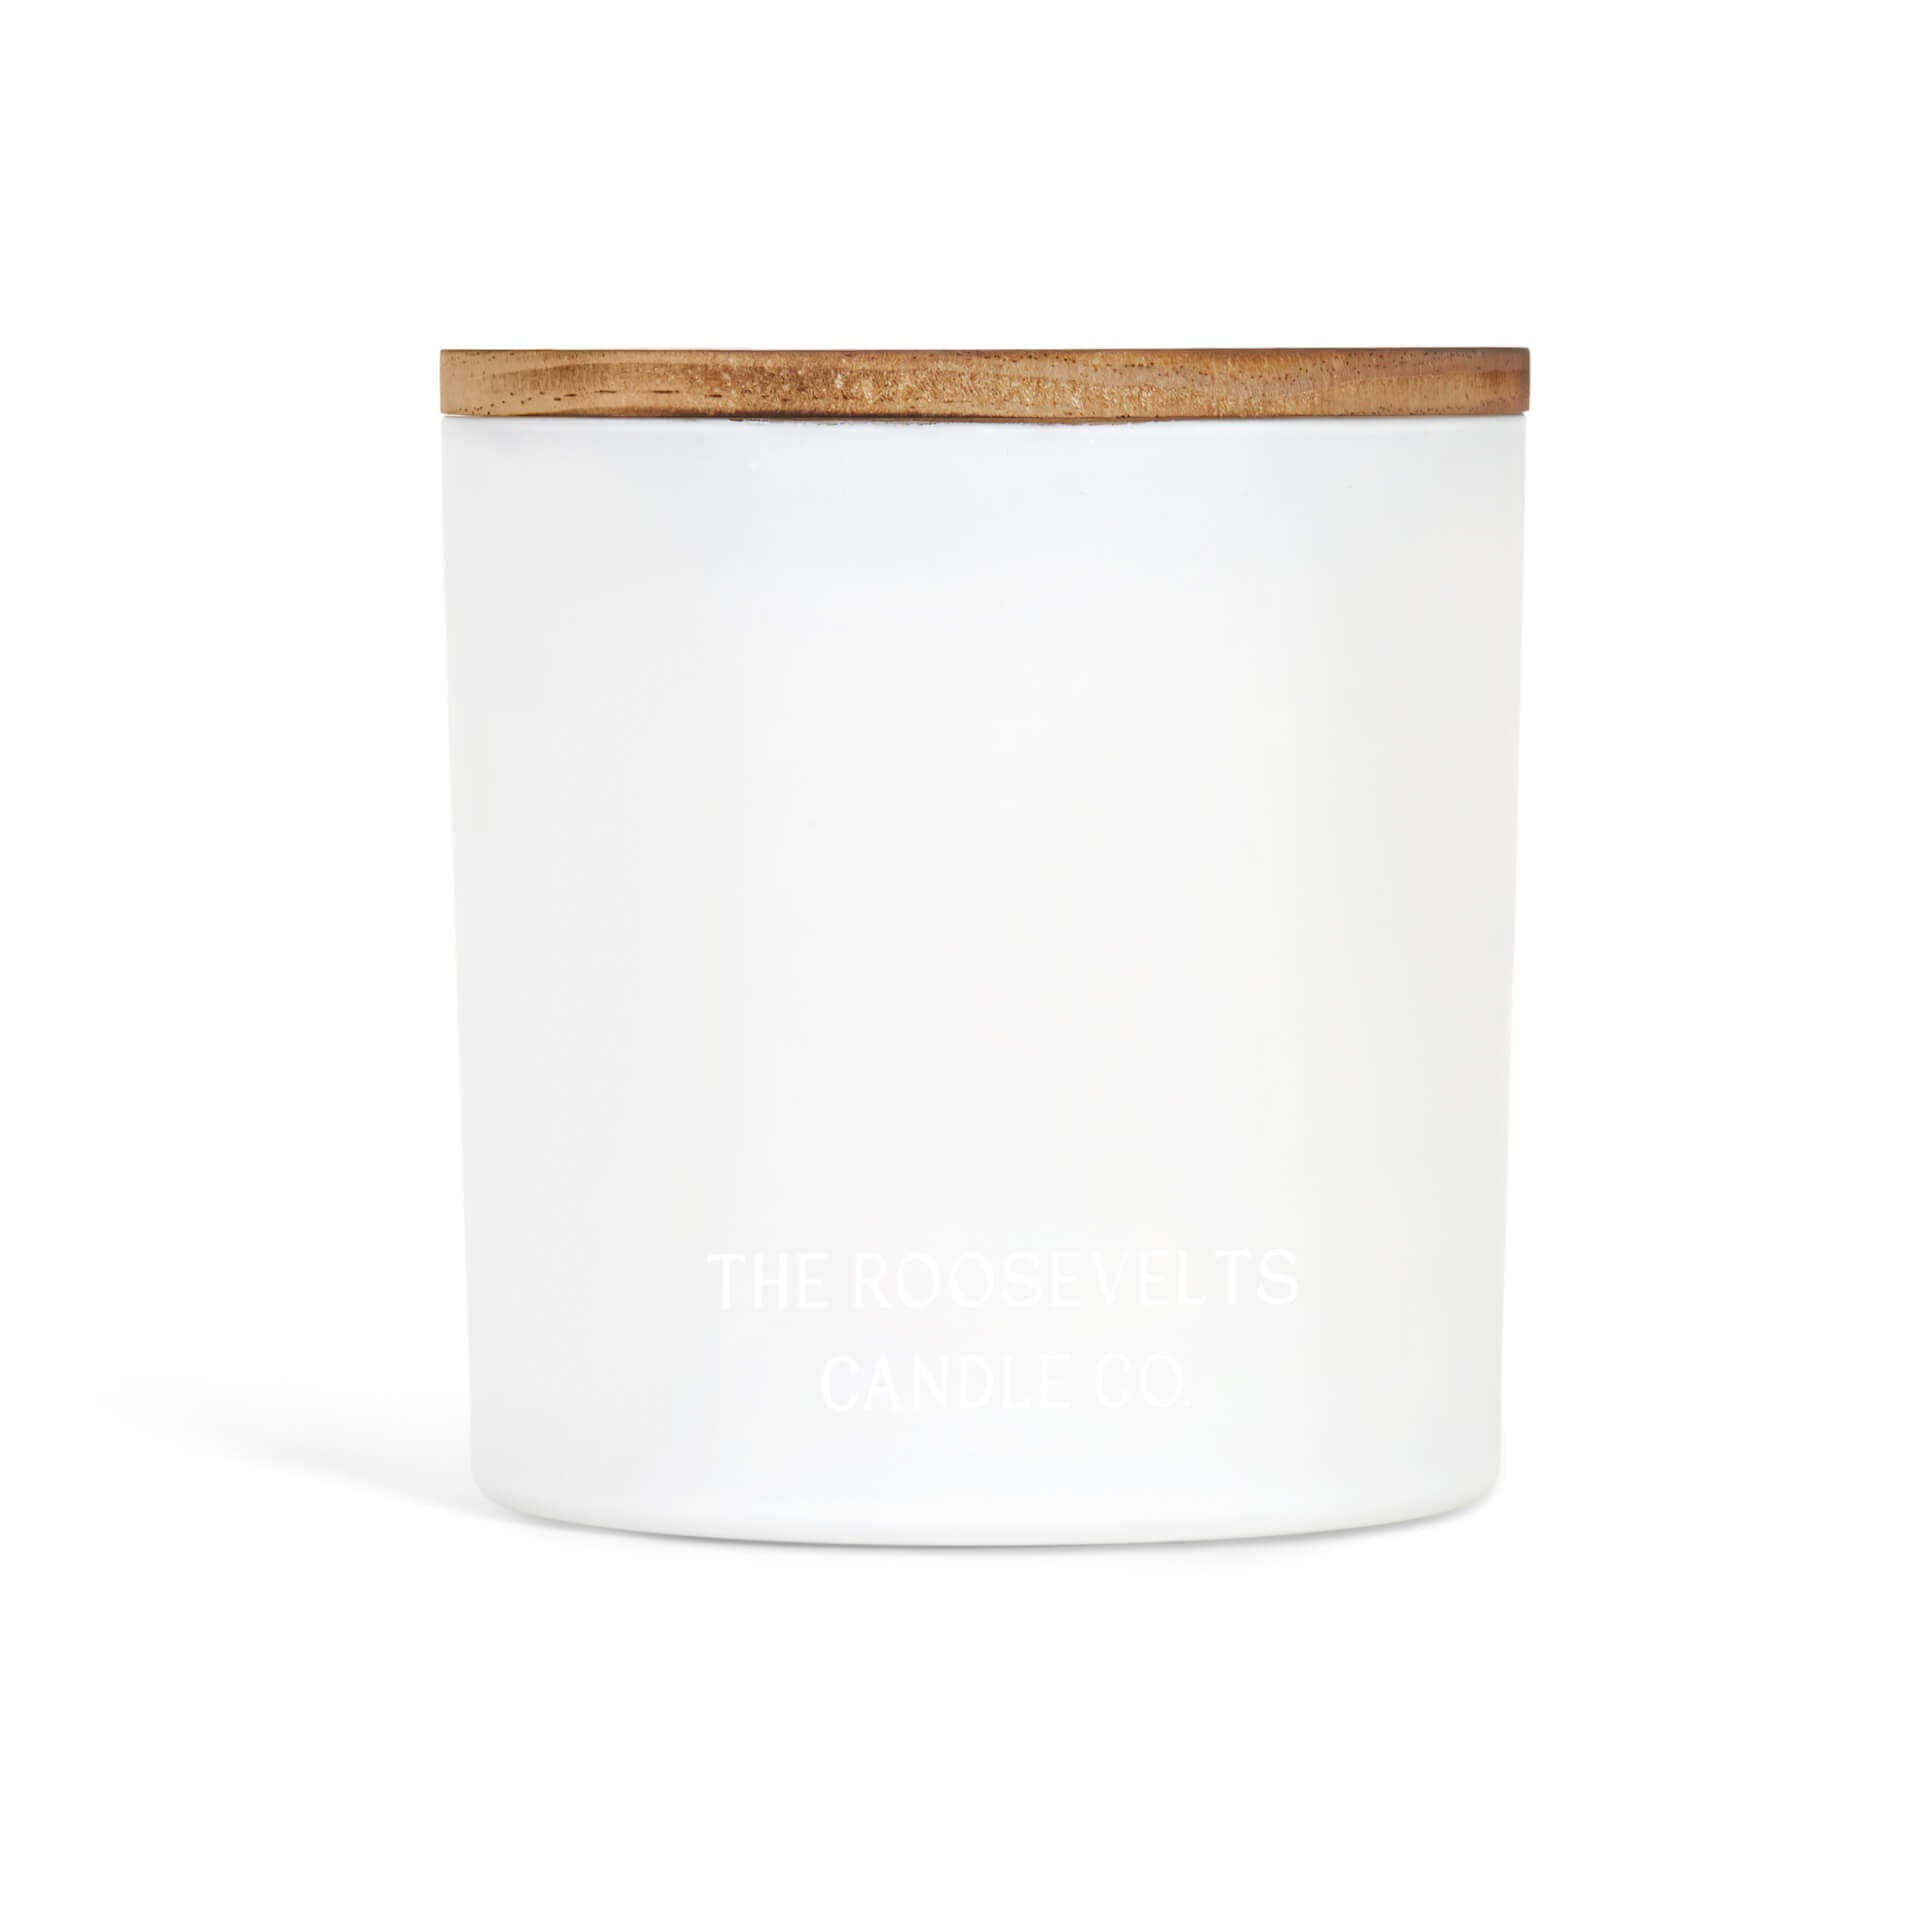 Dry Tortugas 3 Wick Candle - The Roosevelts Candle Co.